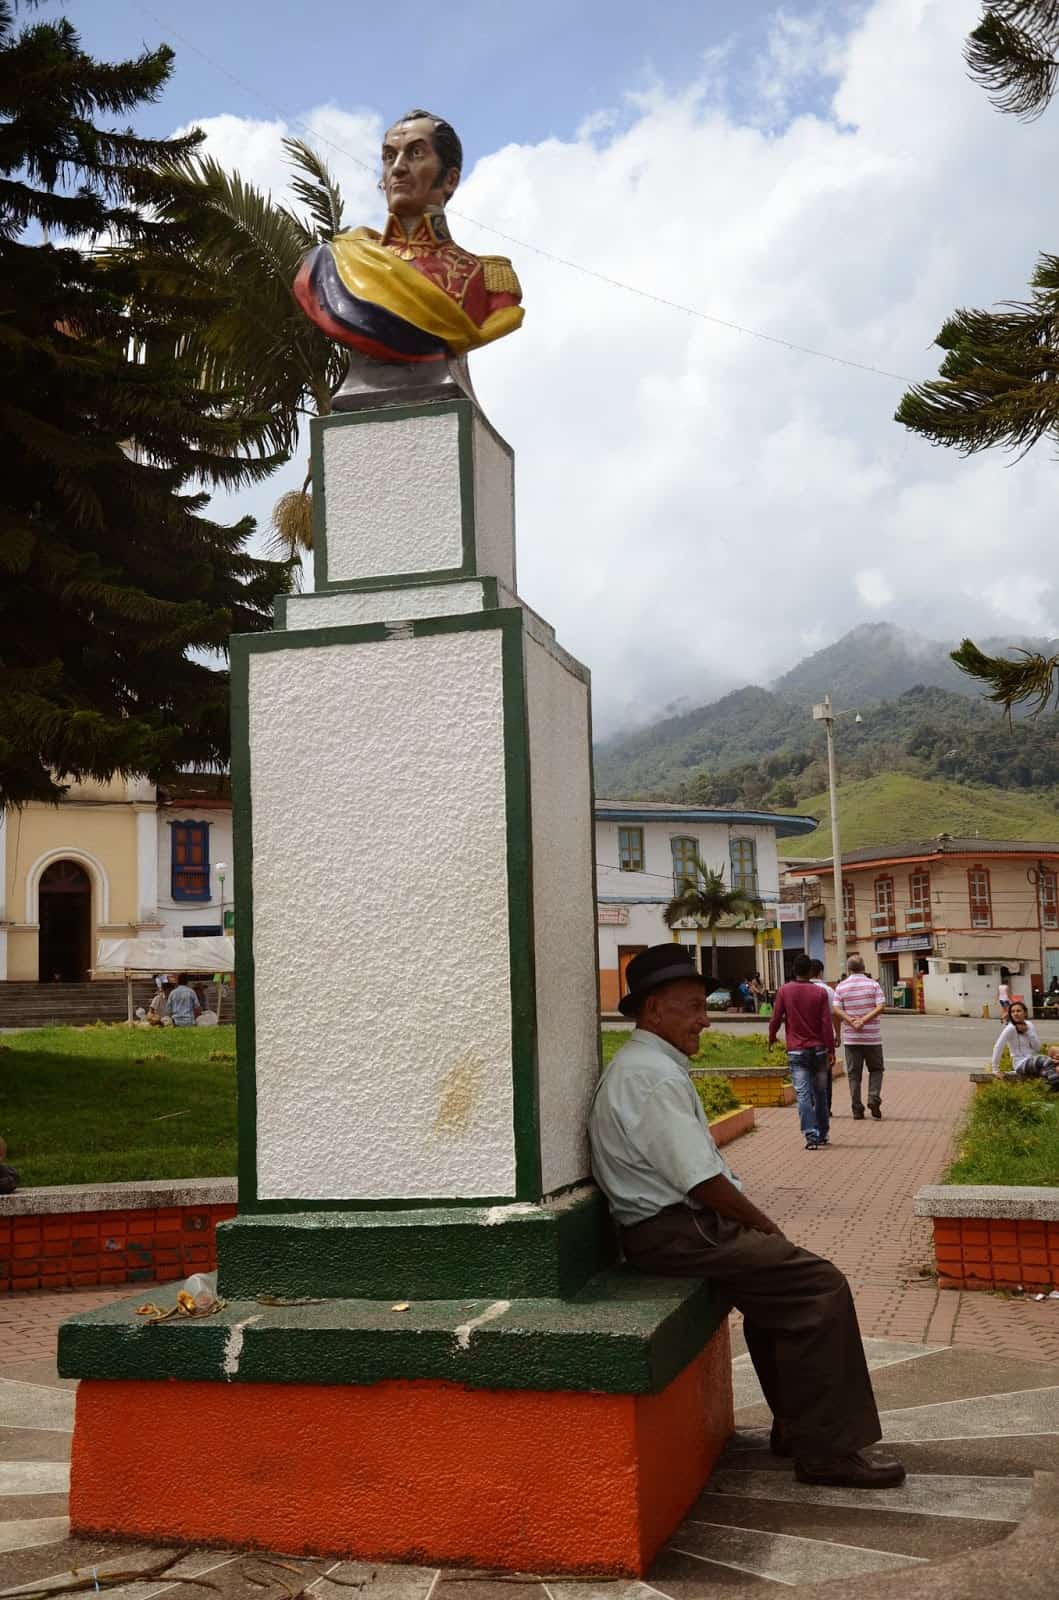 Painted bust of Simón Bolívar in the plaza in Pueblo Rico, Risaralda, Colombia